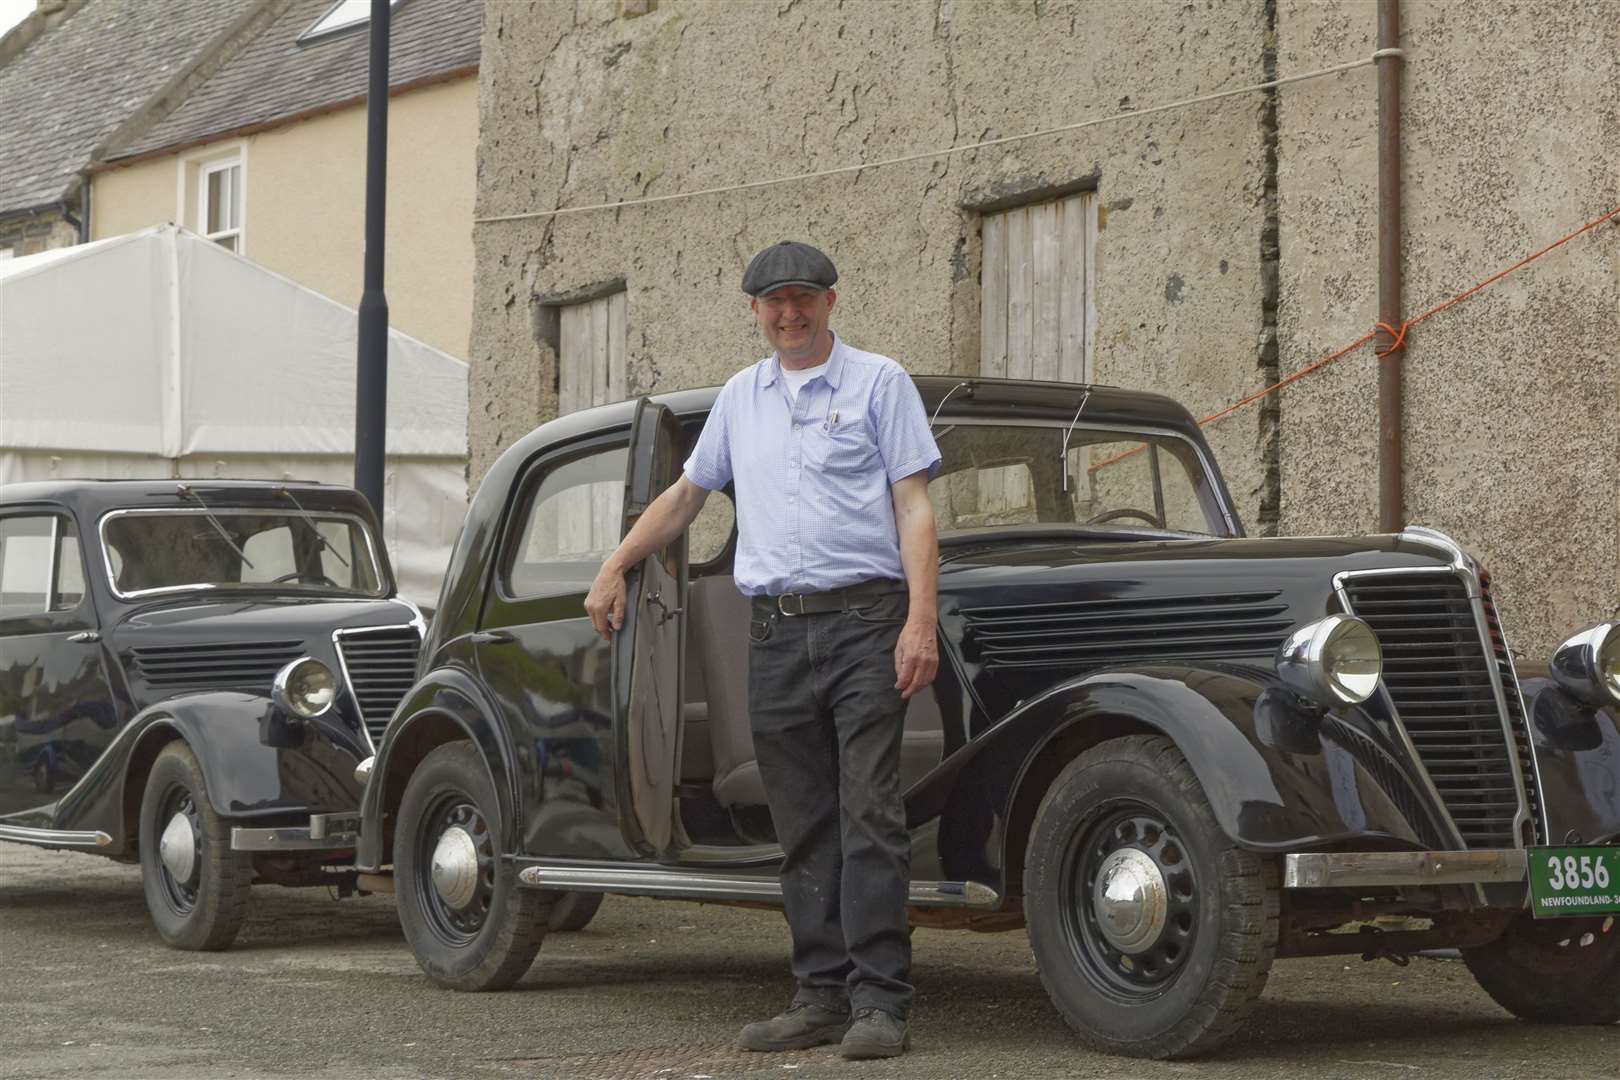 By order of the boat festival and Peaky Blinders, David Urquhart, chairman of the Scottish Traditional Boat Festival with a 1938 Renault Primaquatre car, one of two which will be on display on Saturday and Sunday, June 18-19 in Portsoy, where two episodes were filmed. Picture: J Marnoch